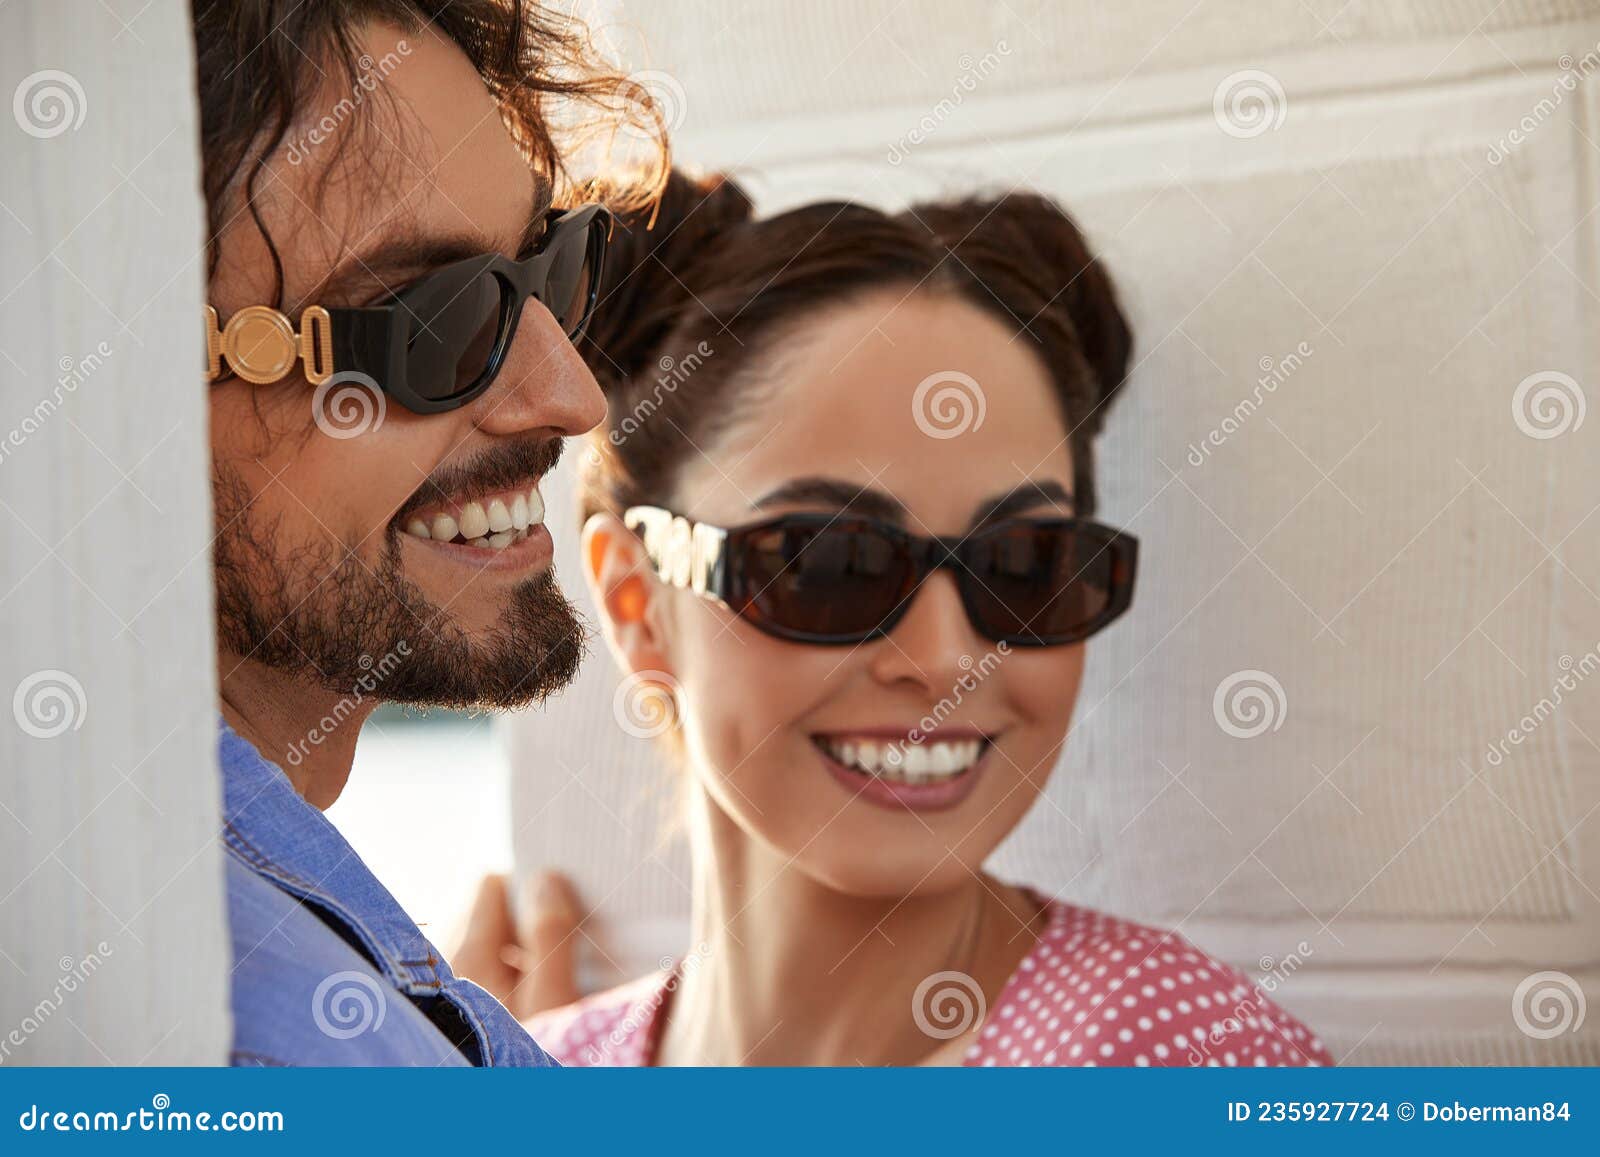 Fashion Models Couple Wearing Sunglasses Woman And Handsome Young Man Portrait Over Light